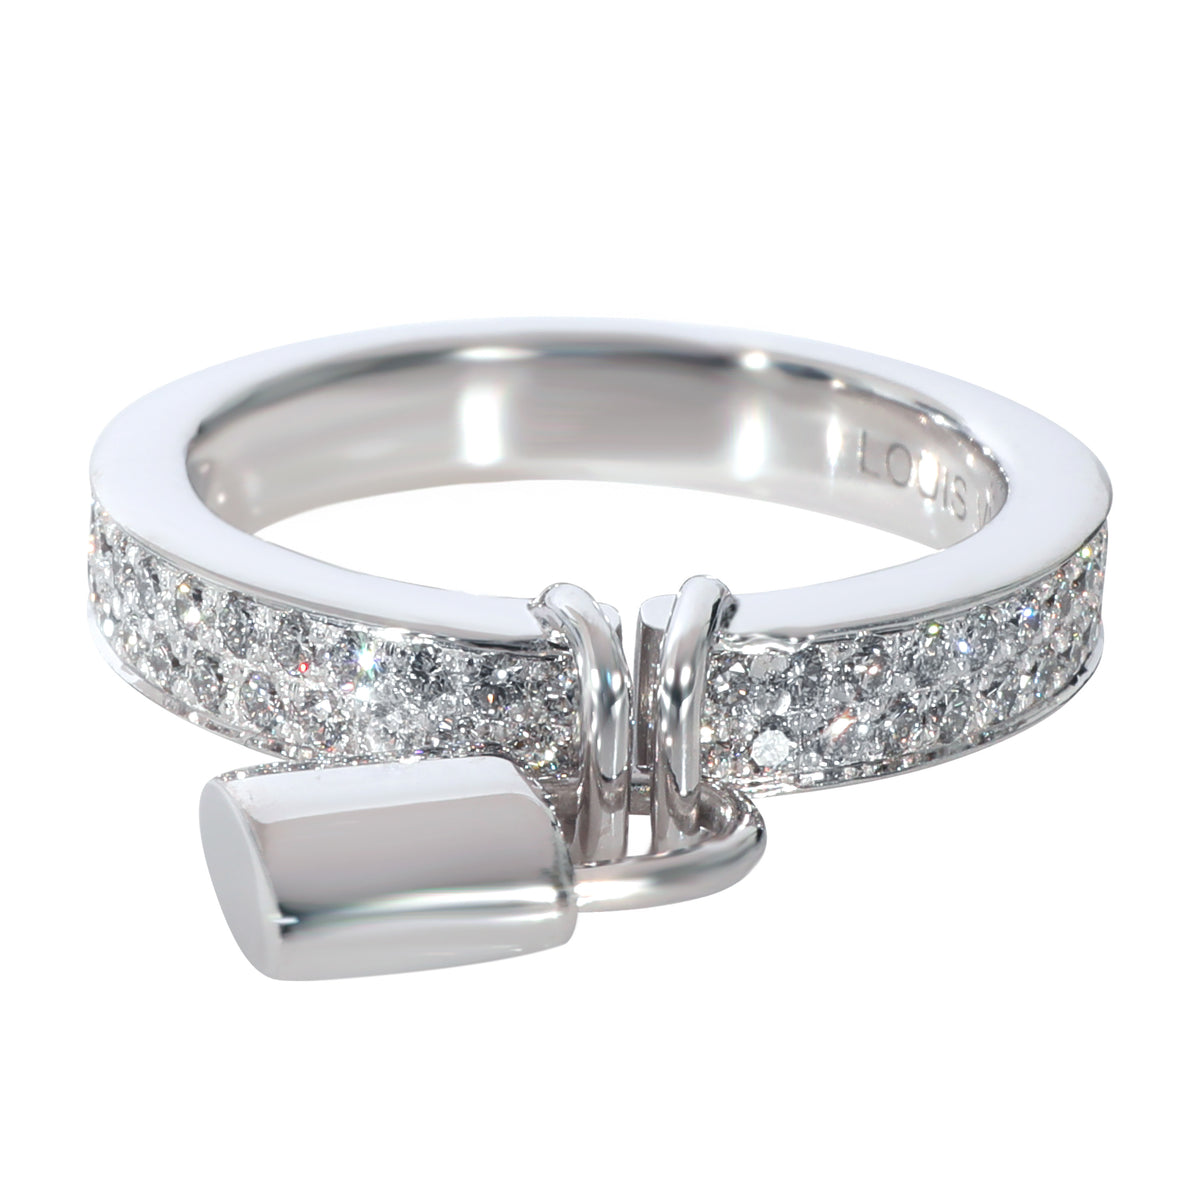 Louis Vuitton Lockit Ring in 18K White Gold 0.40 ctw - Fashion Ring / White Gold | Pre-owned & Certified | used Second Hand | Unisex